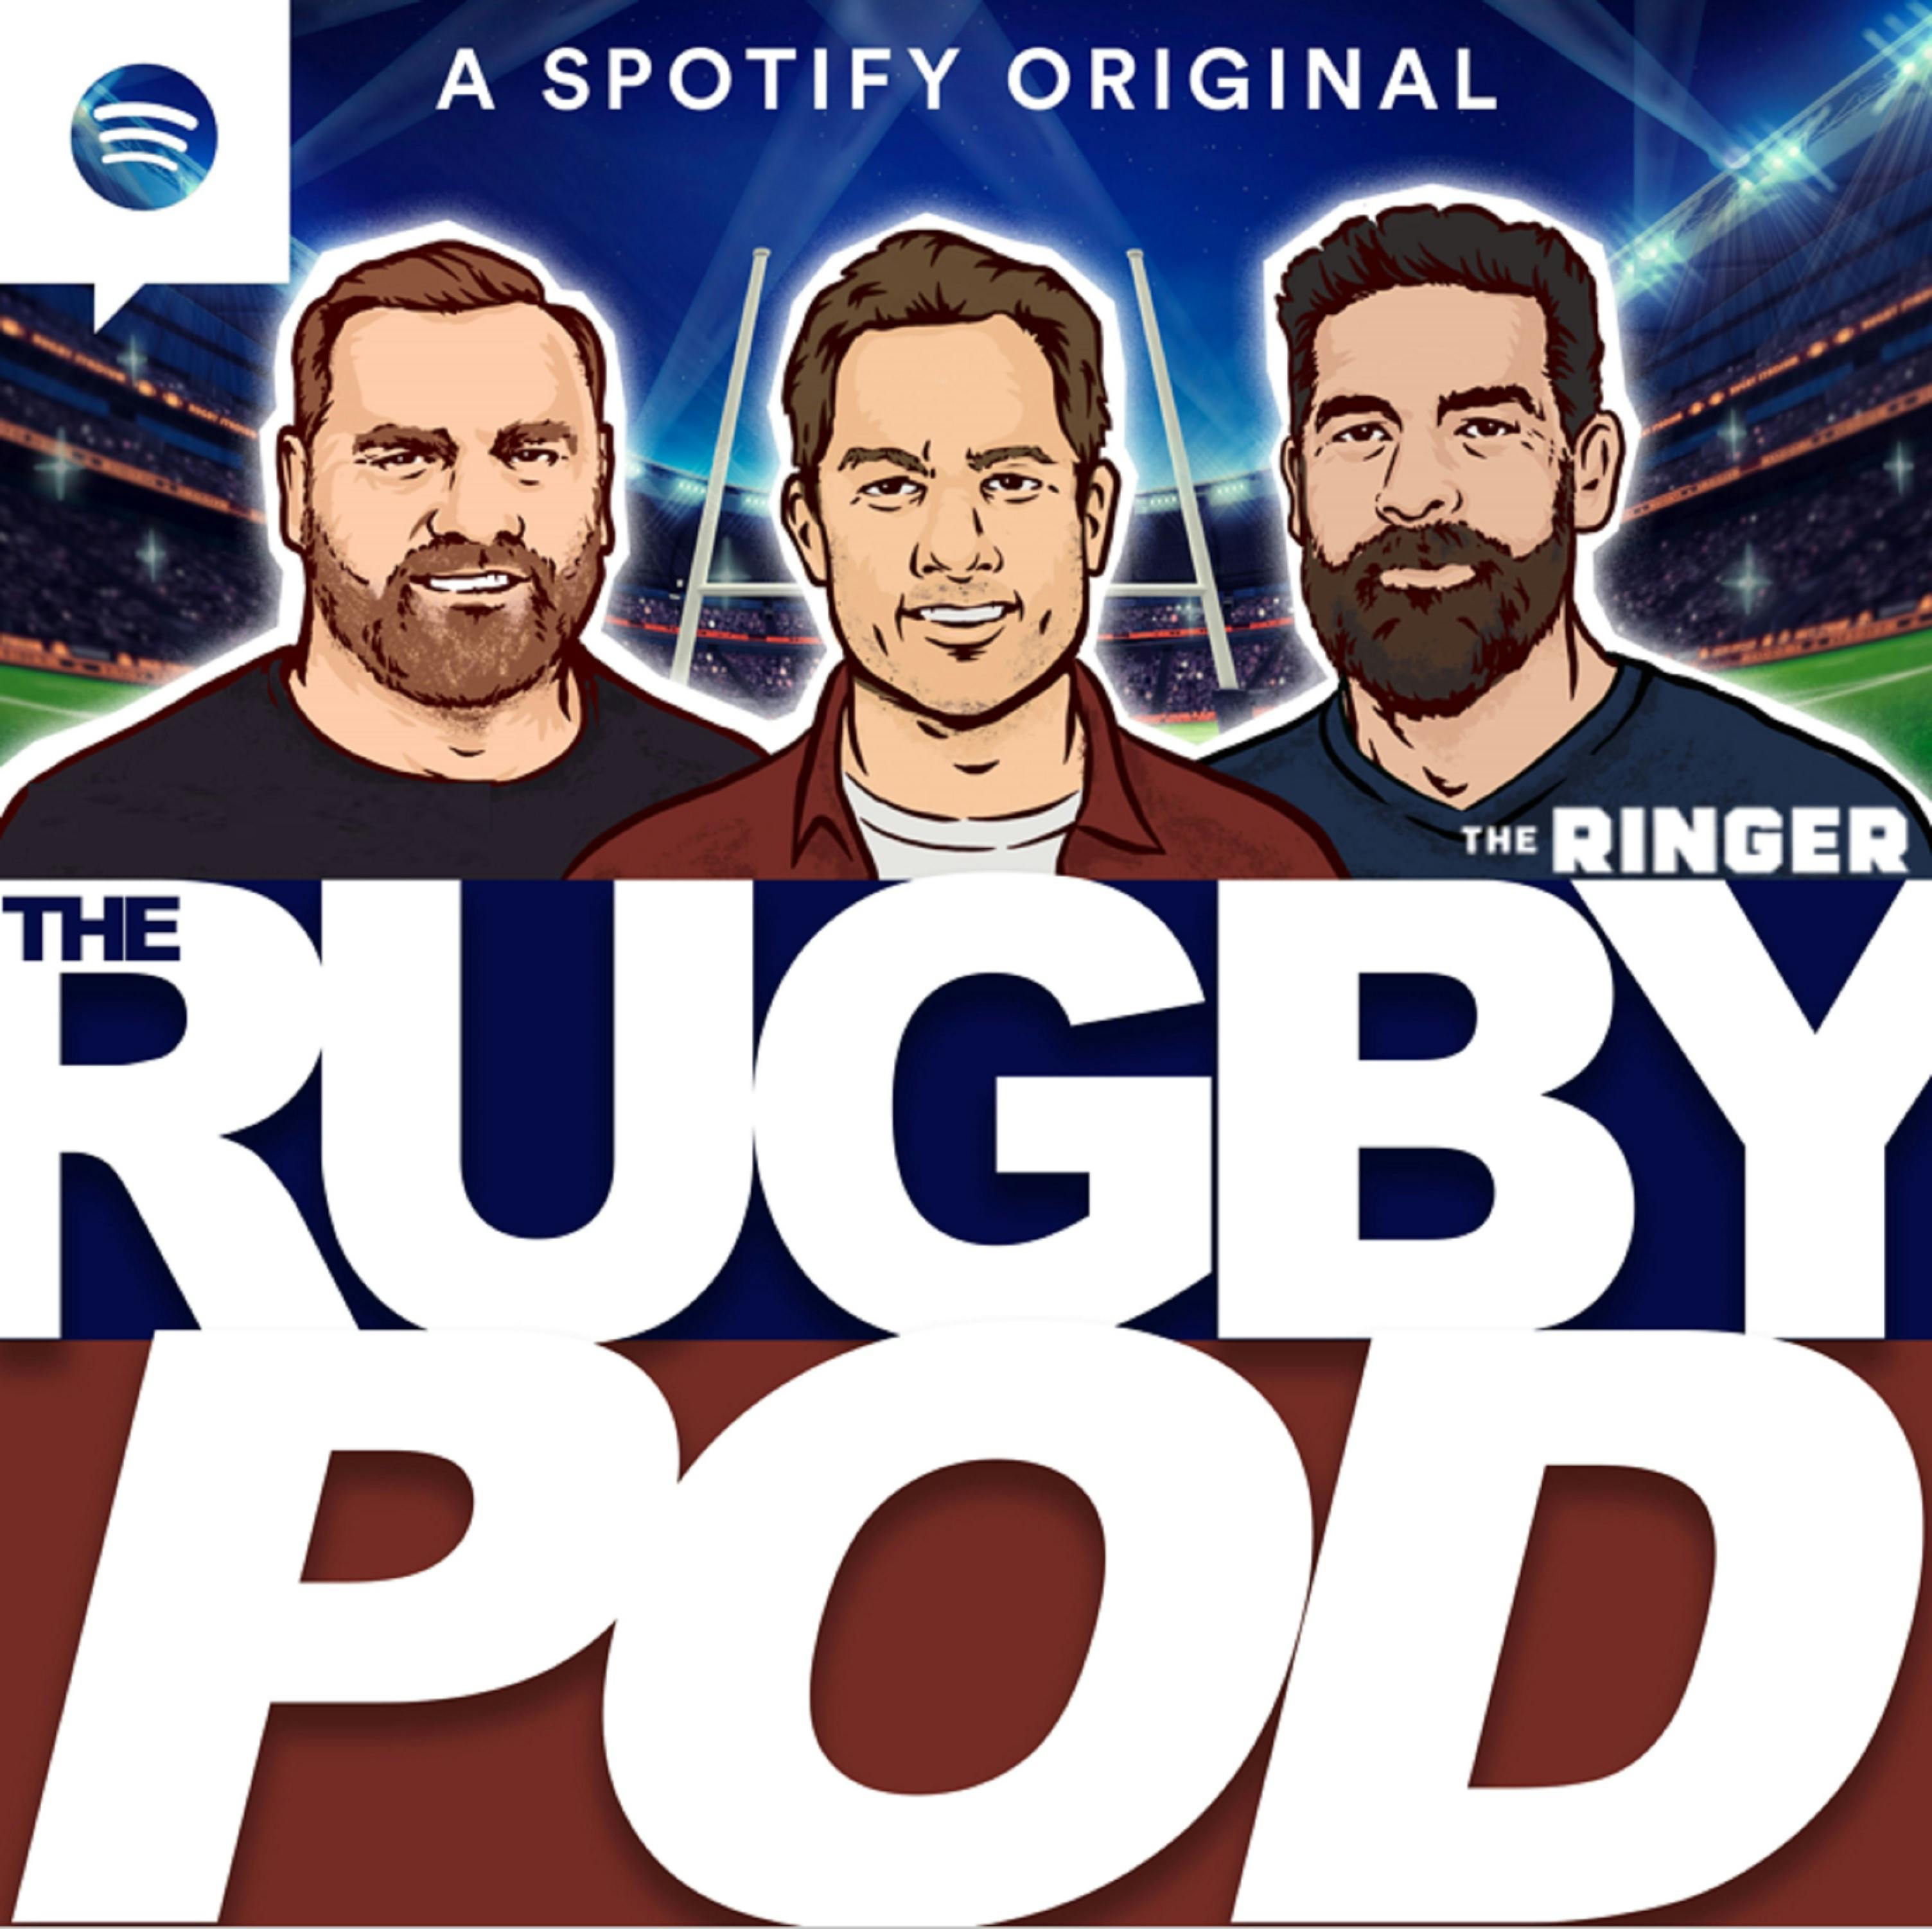 Episode 12 - The Marcus Smith Show, New Zealand’s Scotty Stevenson, & Woeful Wales